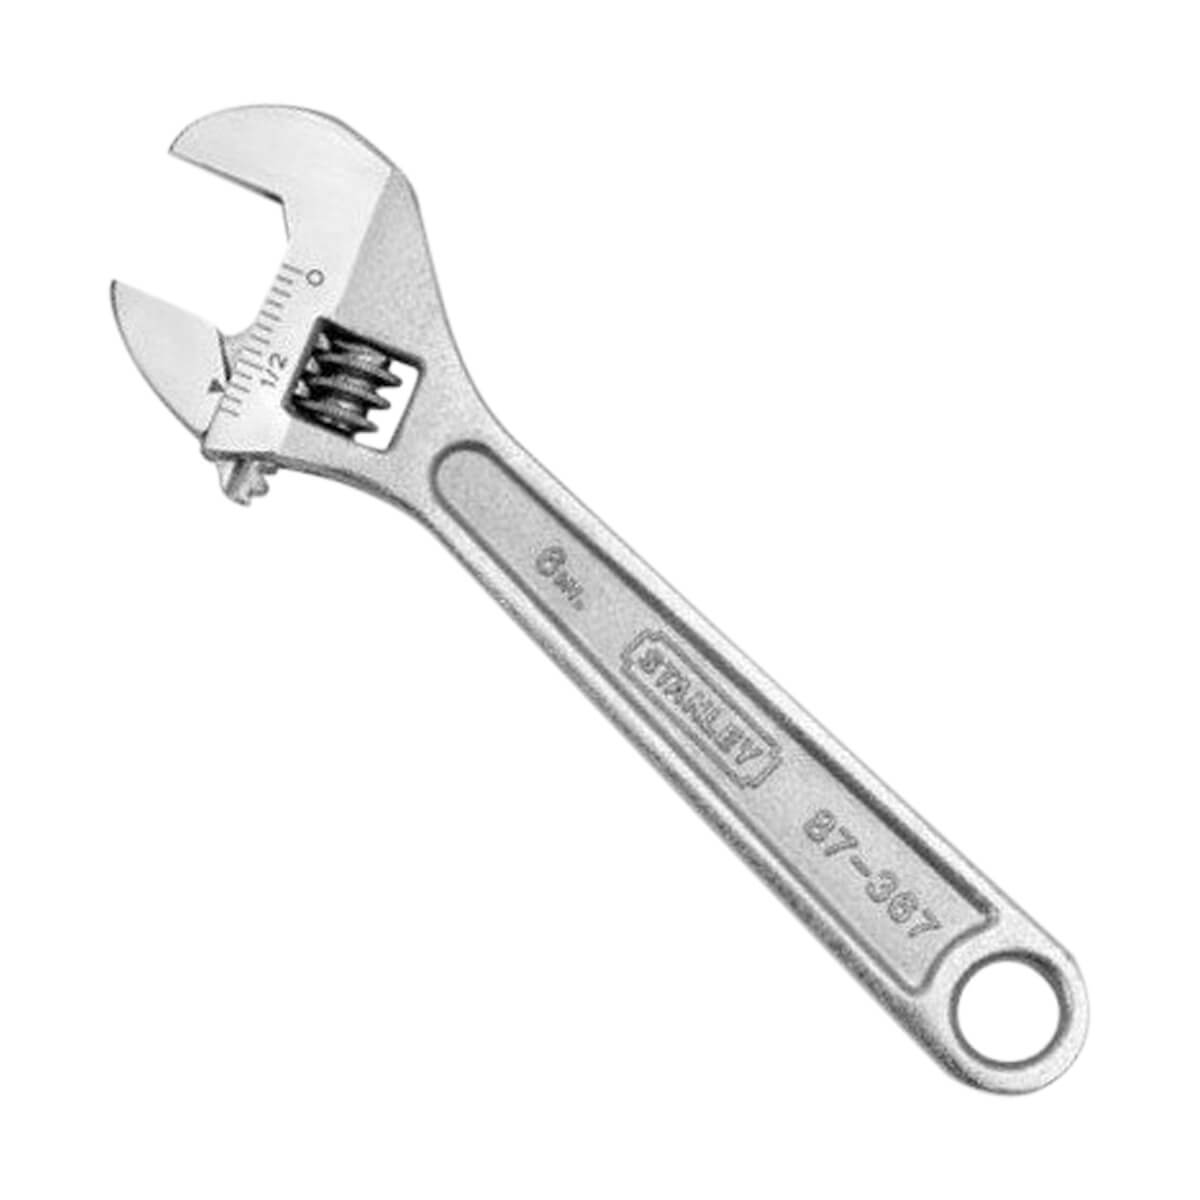 Stanley Adjustable Wrench - 12-in